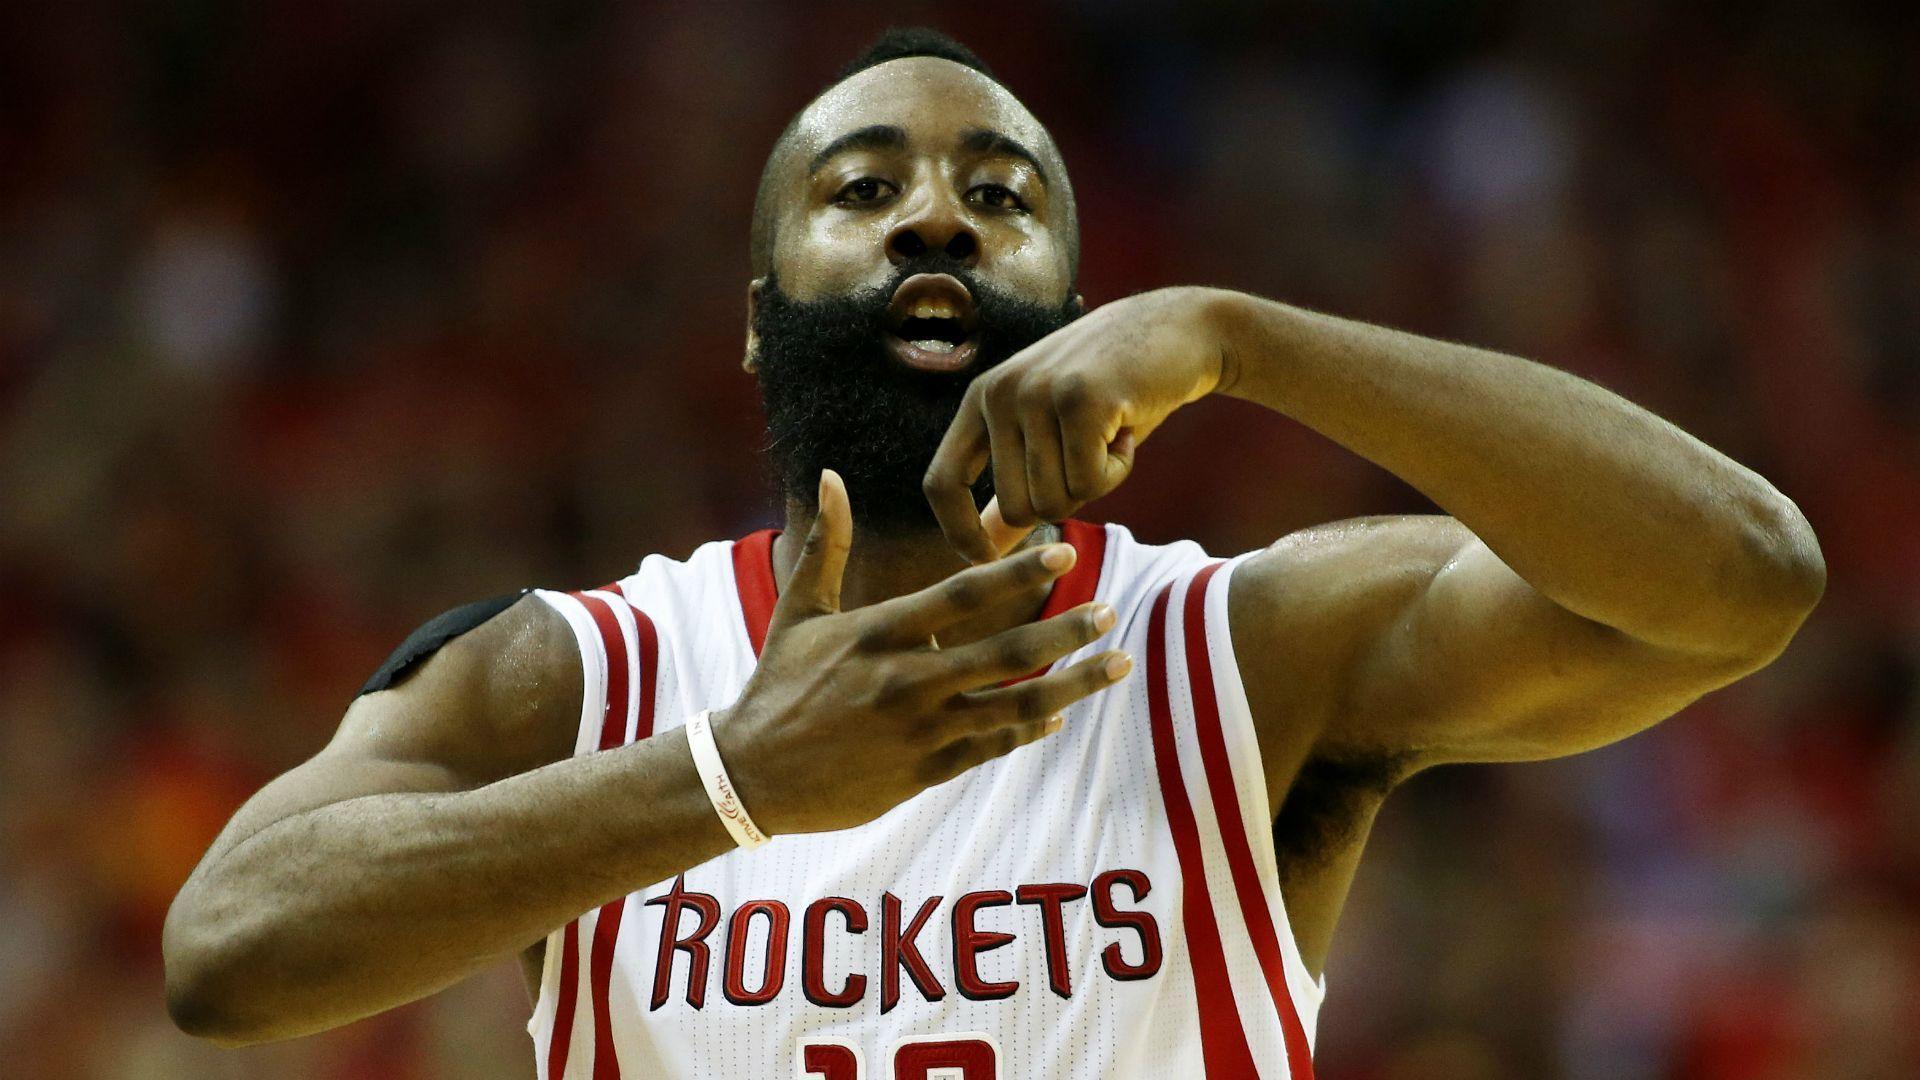 Lil B is threatening to curse James Harden over cooking dance